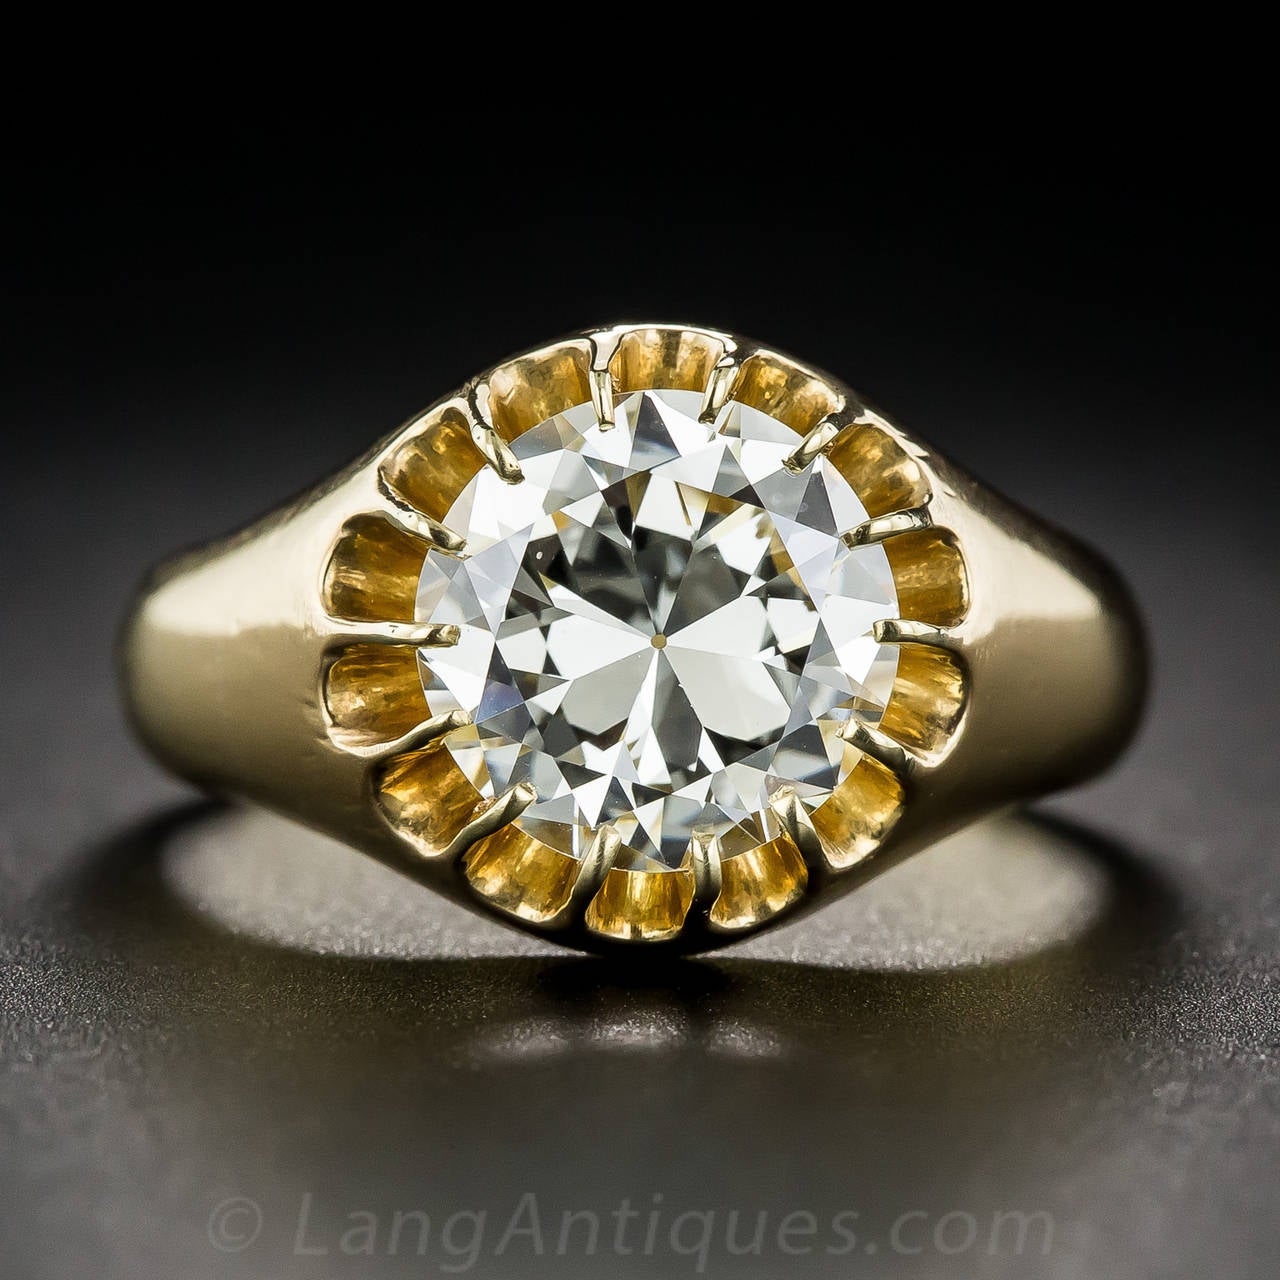 Strikingly and elegantly simple, a warm and glowing European-cut diamond, weighing 3.03 carats, displaying a faint tinge of sunshiny yellow, scintillates solo from within a scalloped circle of prongs in this high polished, richly colored, 18 karat